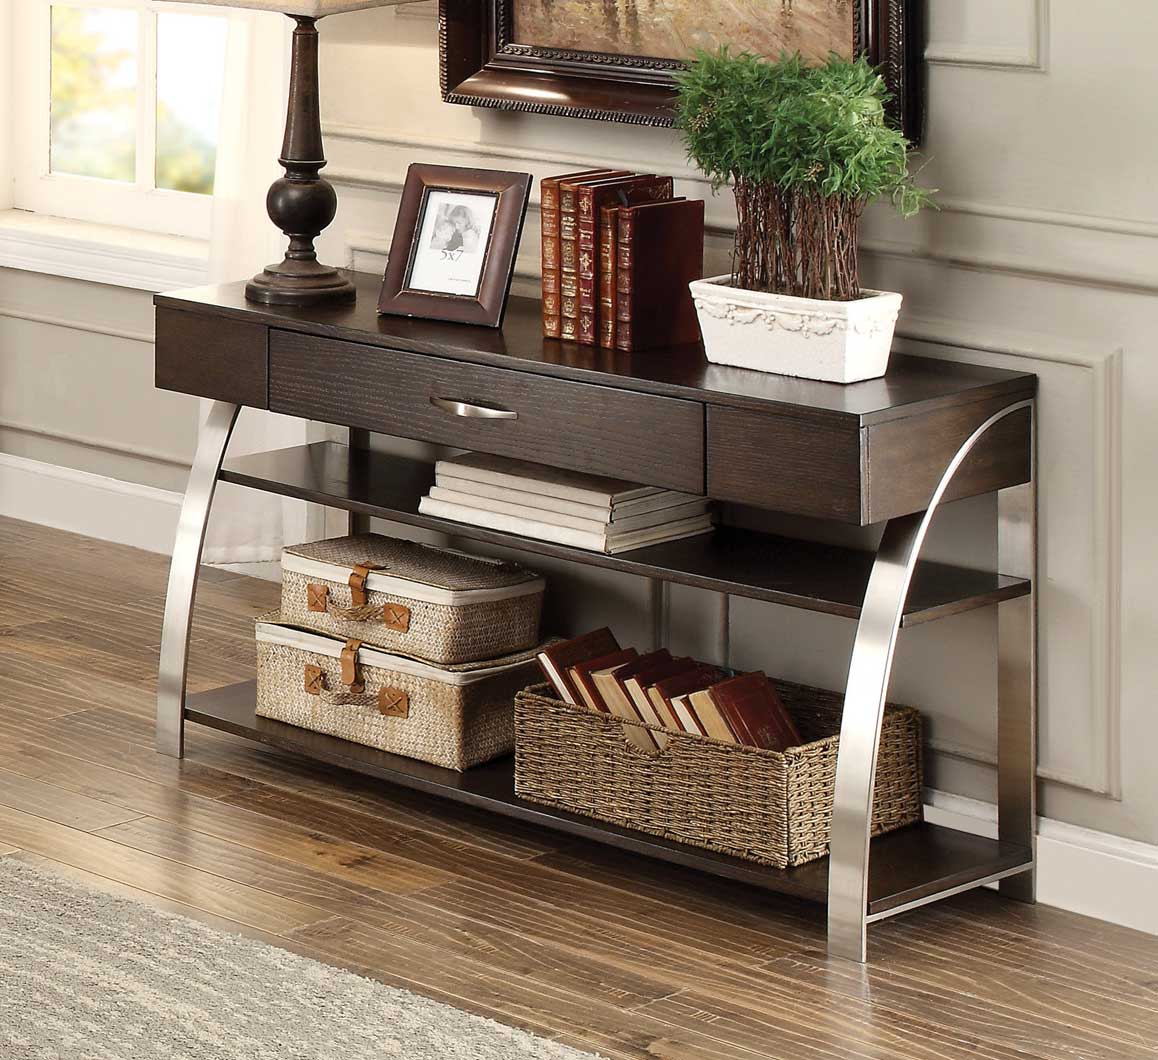 Homelegance Tioga Sofa Table with Functional Drawer - Espresso